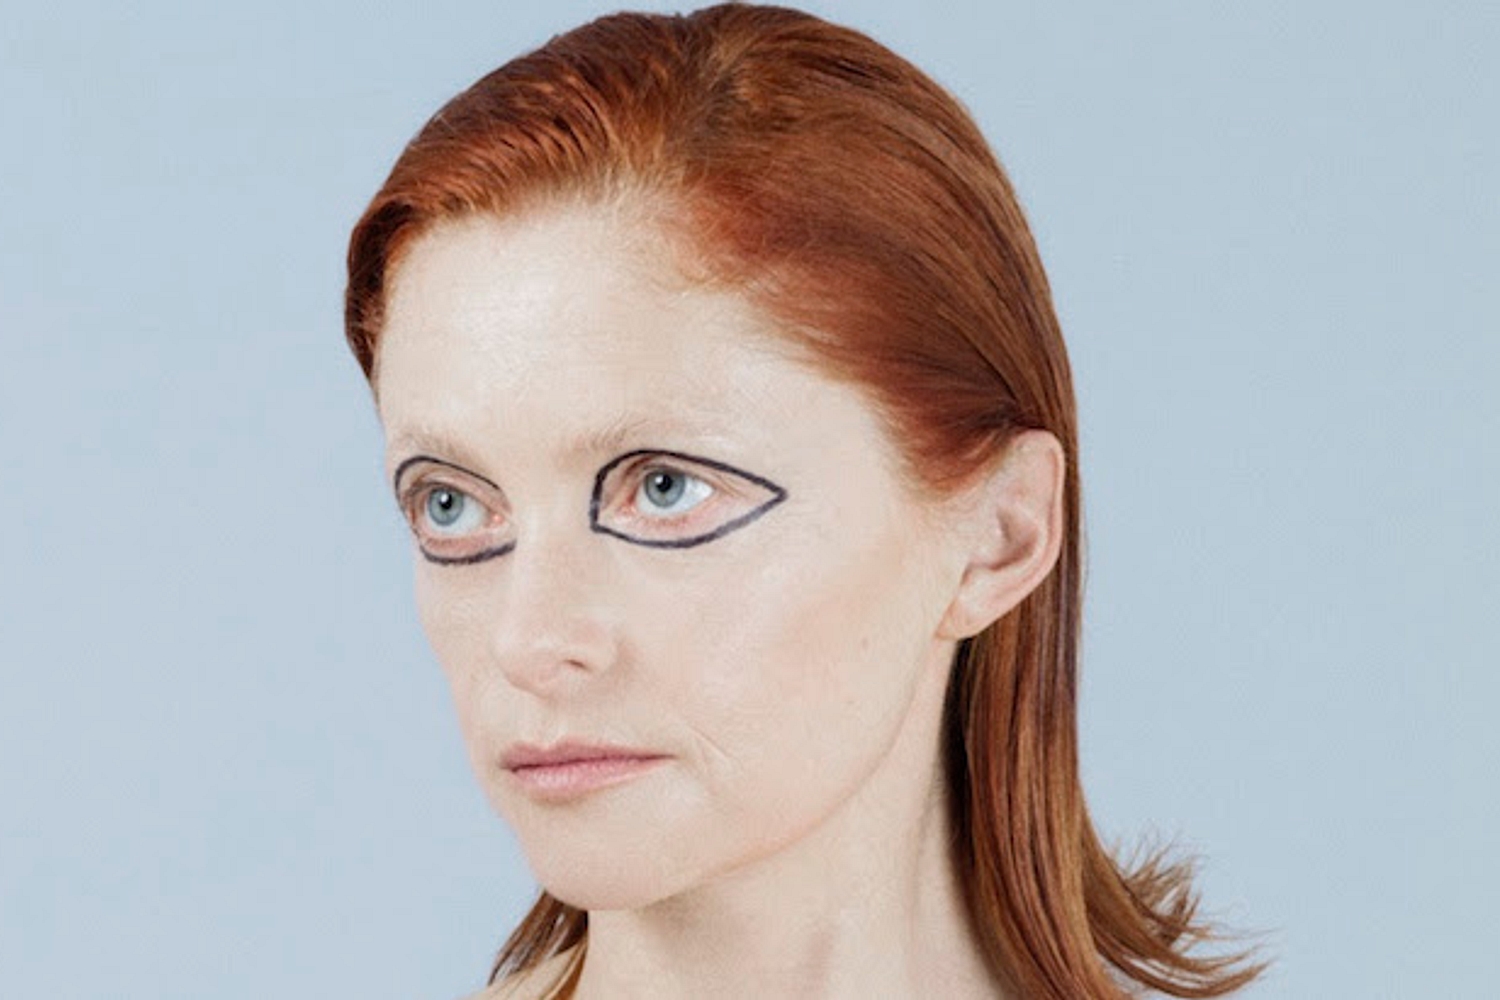 Goldfrapp are back! New album ‘Silver Eye’ is out in March